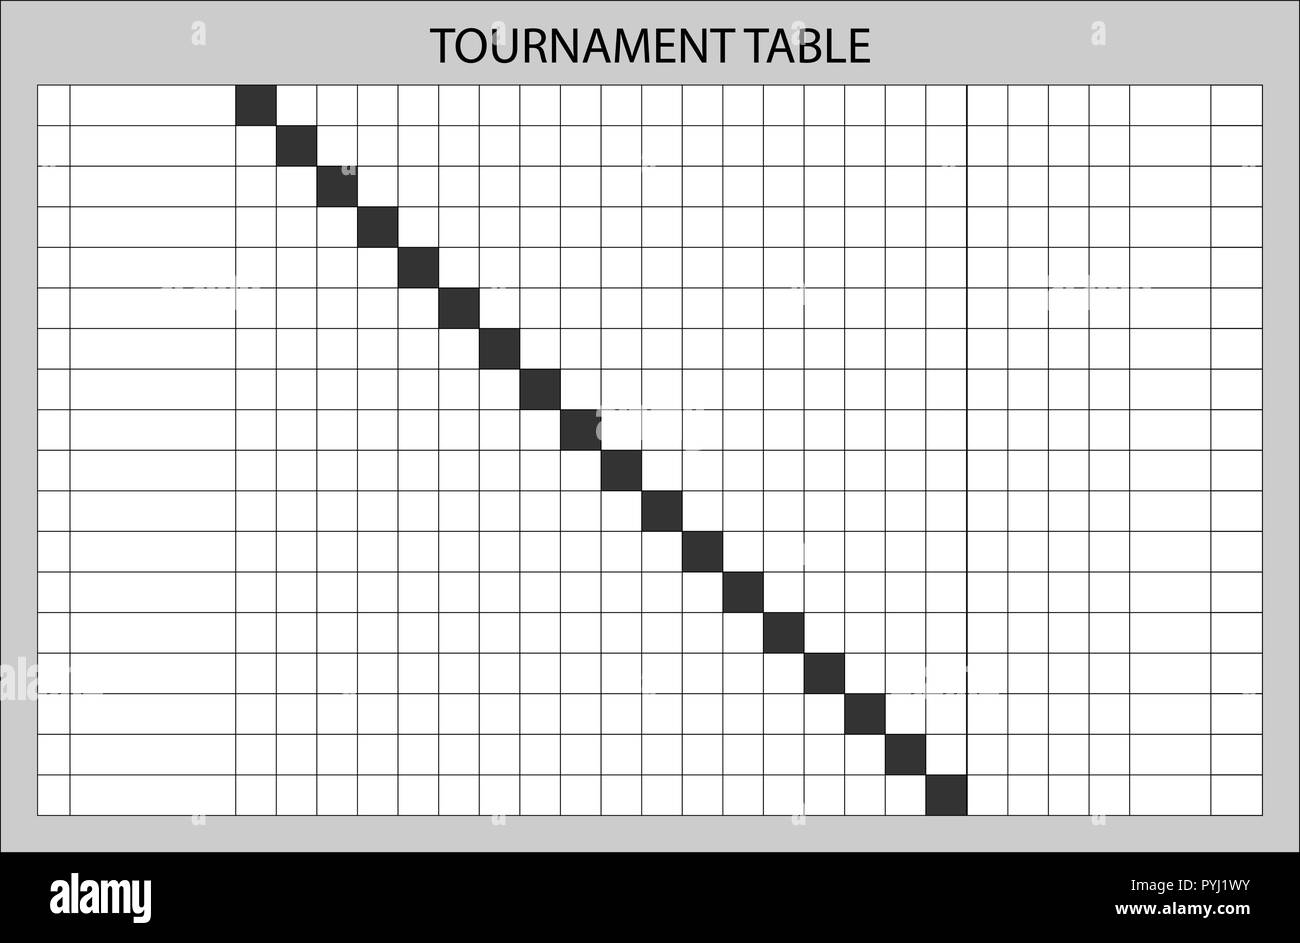 TEAM results table template. Summary tournament table. Vector Stock Vector